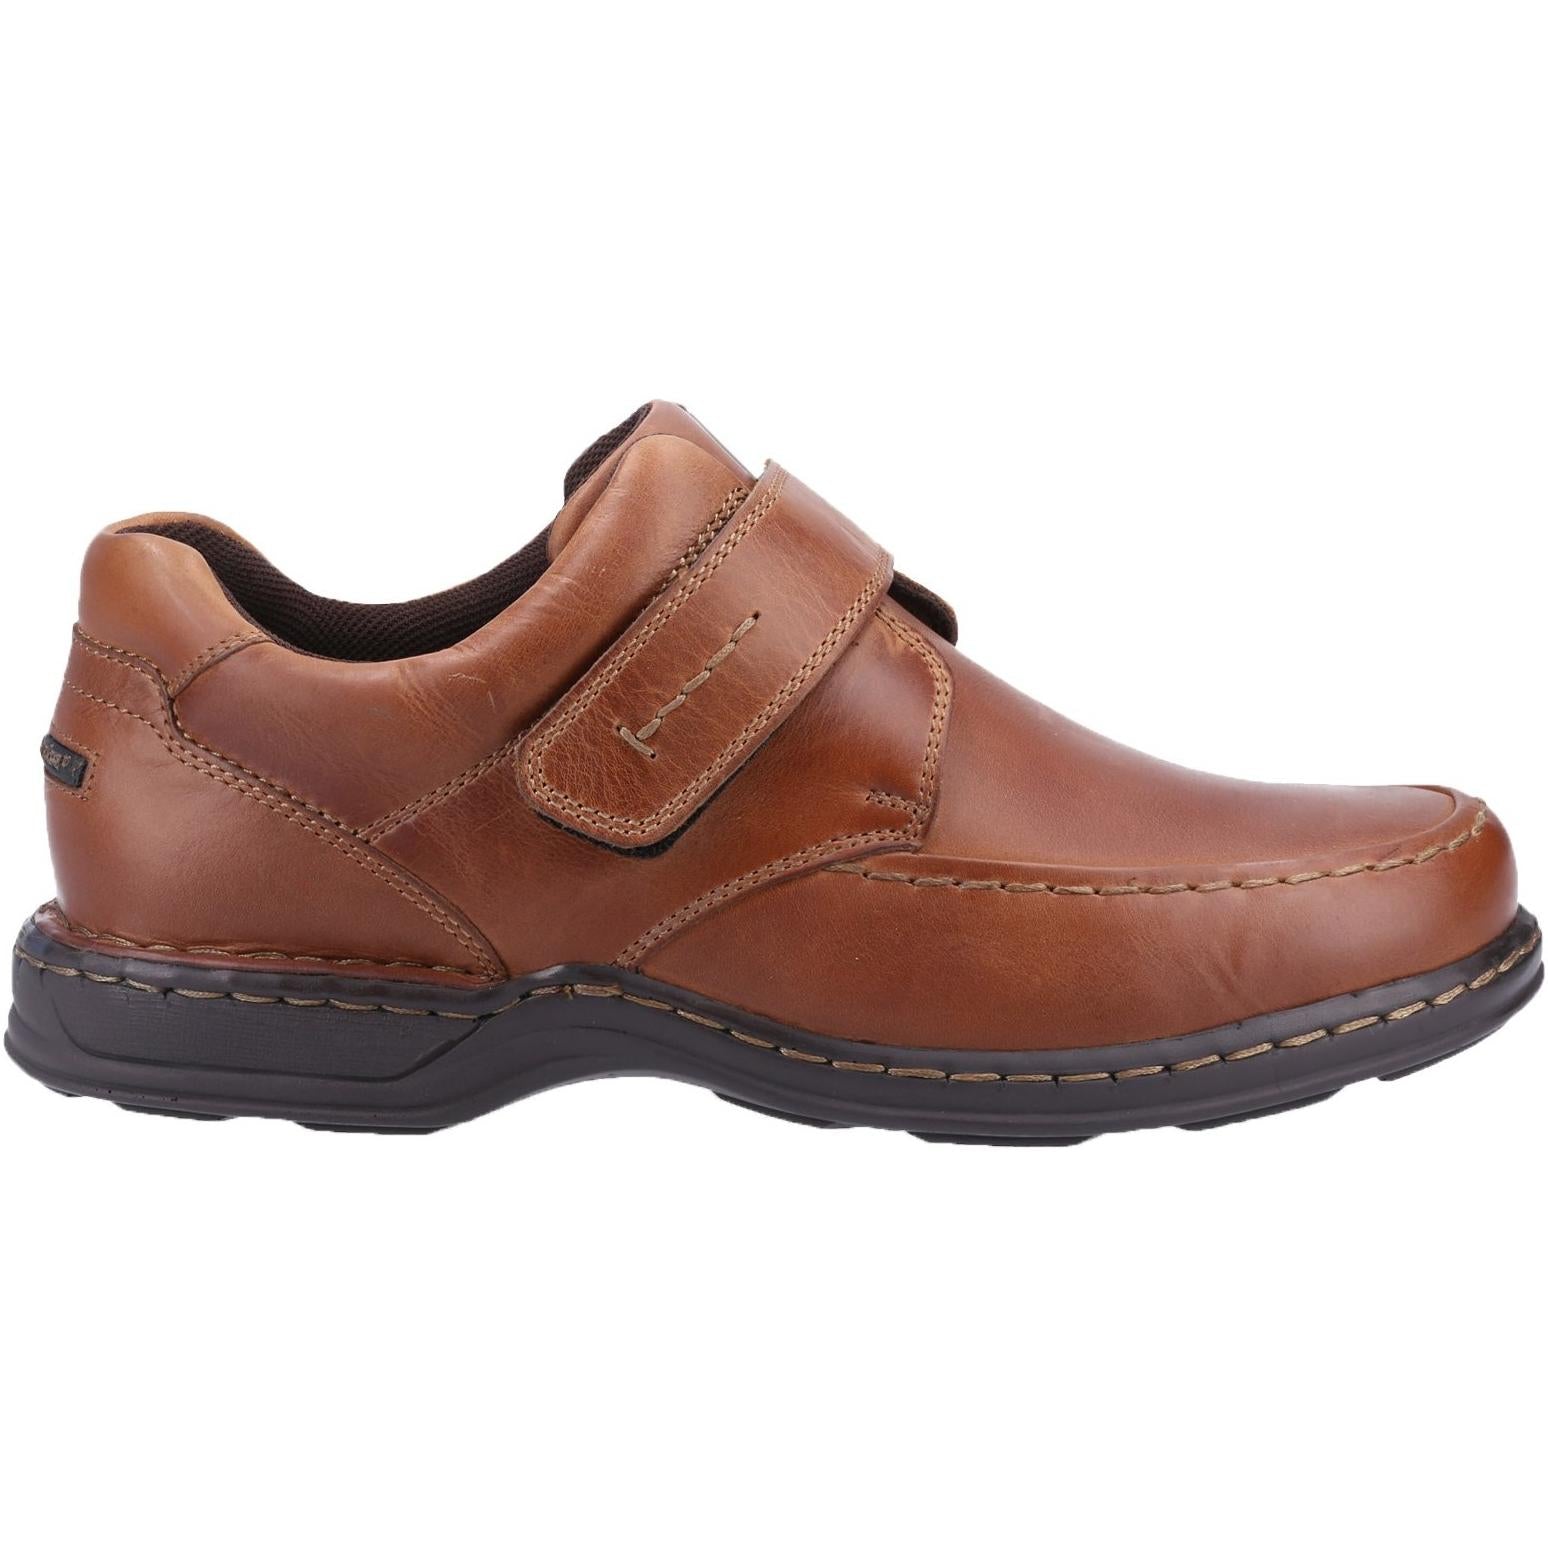 Hush Puppies ROMAN Touch Fastening Shoes